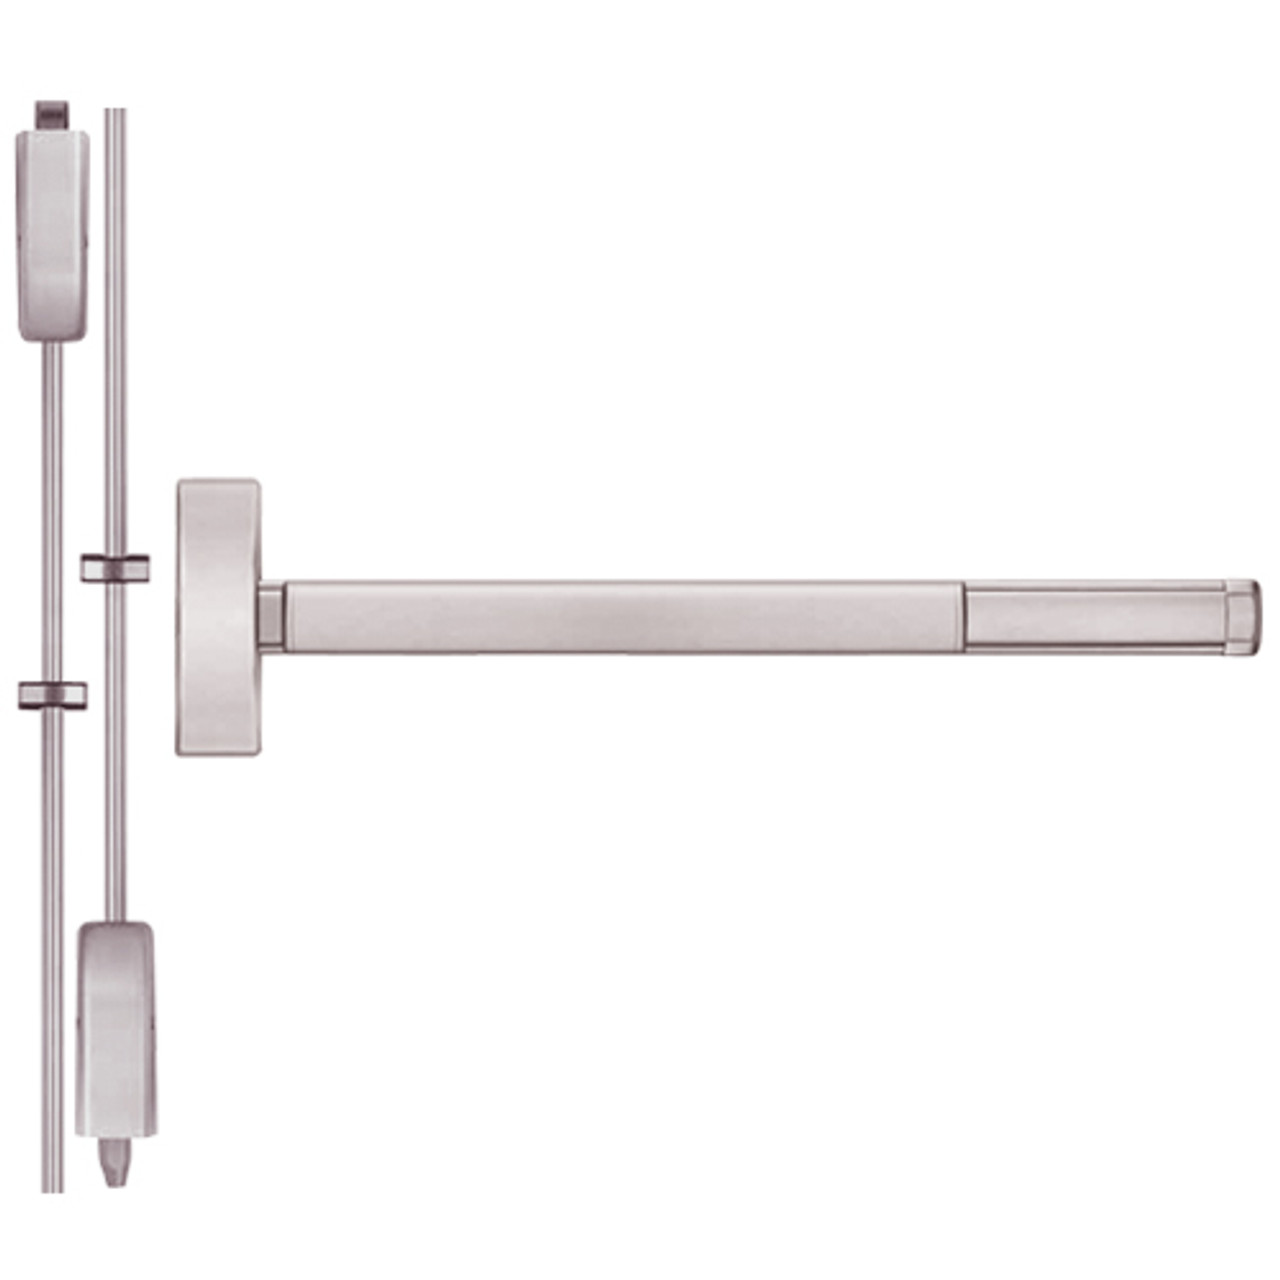 DEFL2208-628-48 PHI 2200 Series Fire Rated Apex Surface Vertical Rod Device with Delayed Egress Prepped for Key Controls Lever/Knob in Satin Aluminum Finish